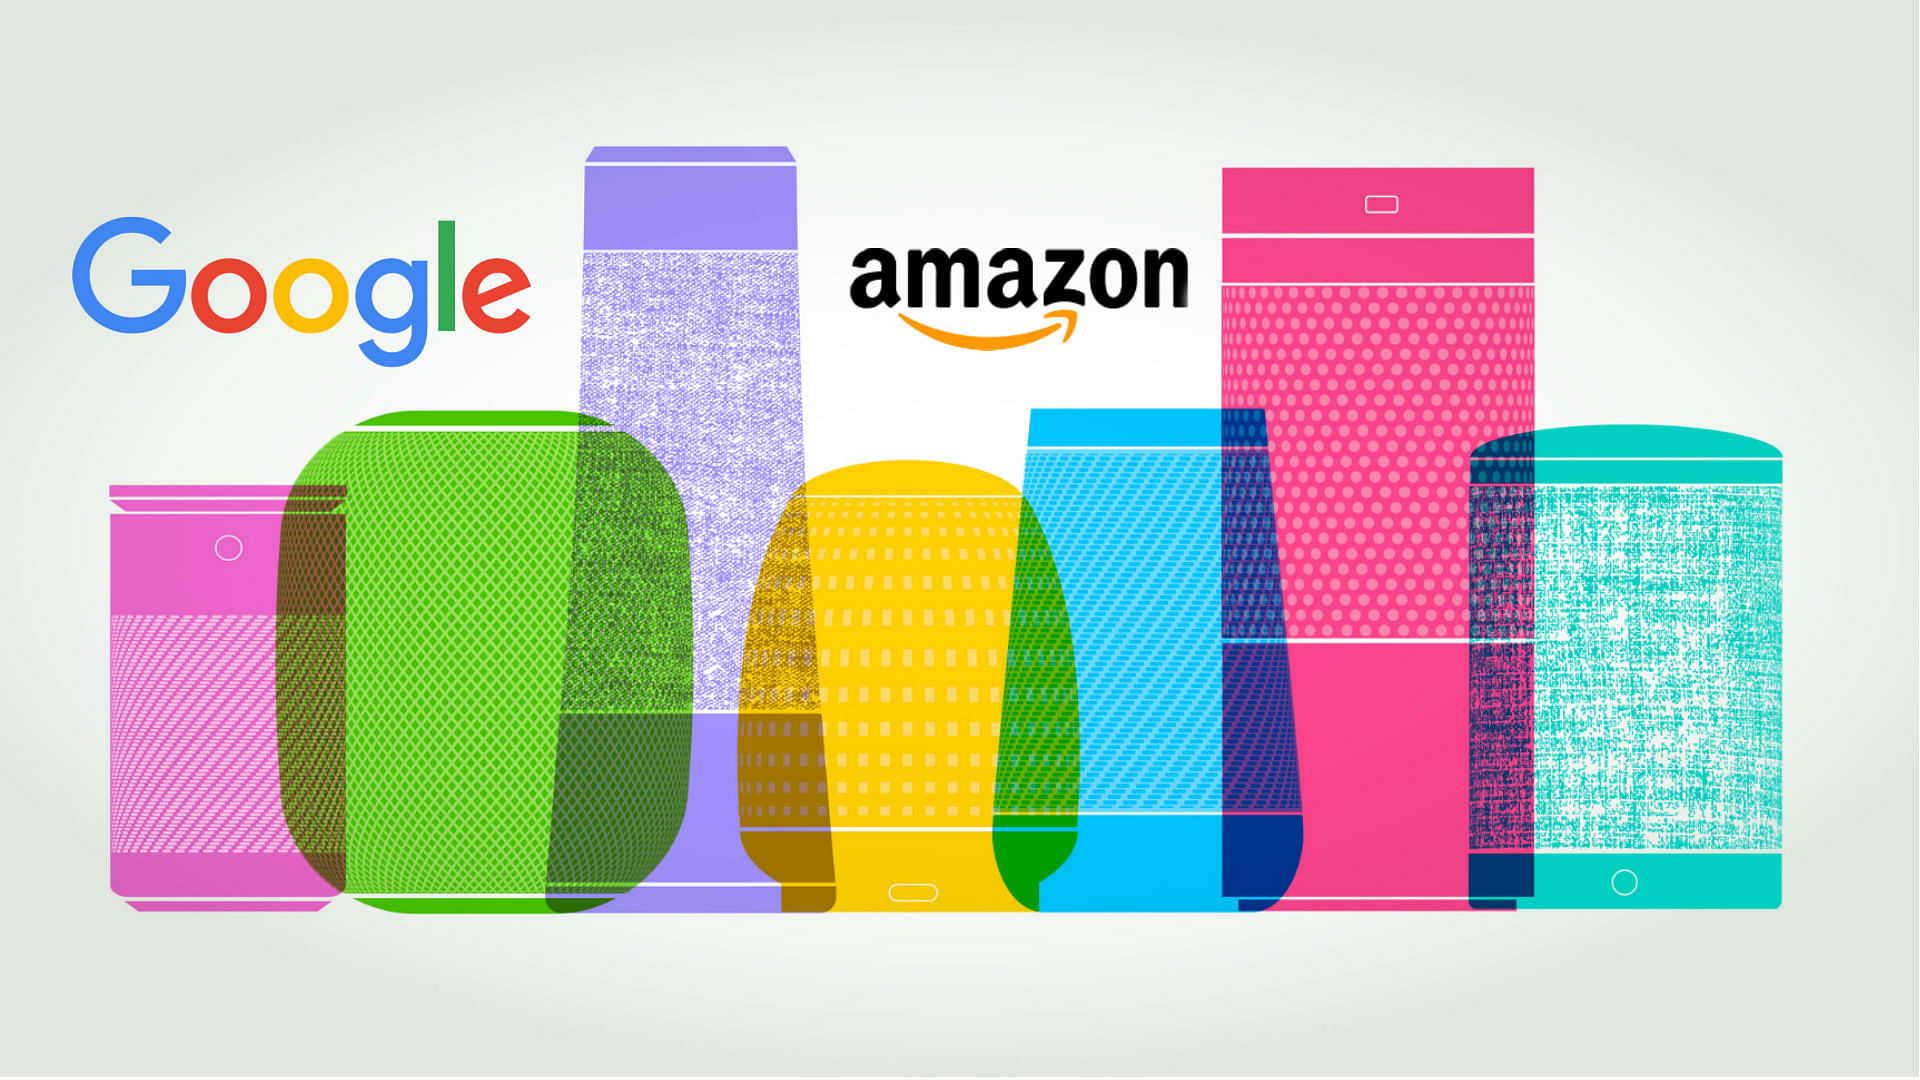 Google and Amazon have found another battleground in the Indian market.&nbsp;